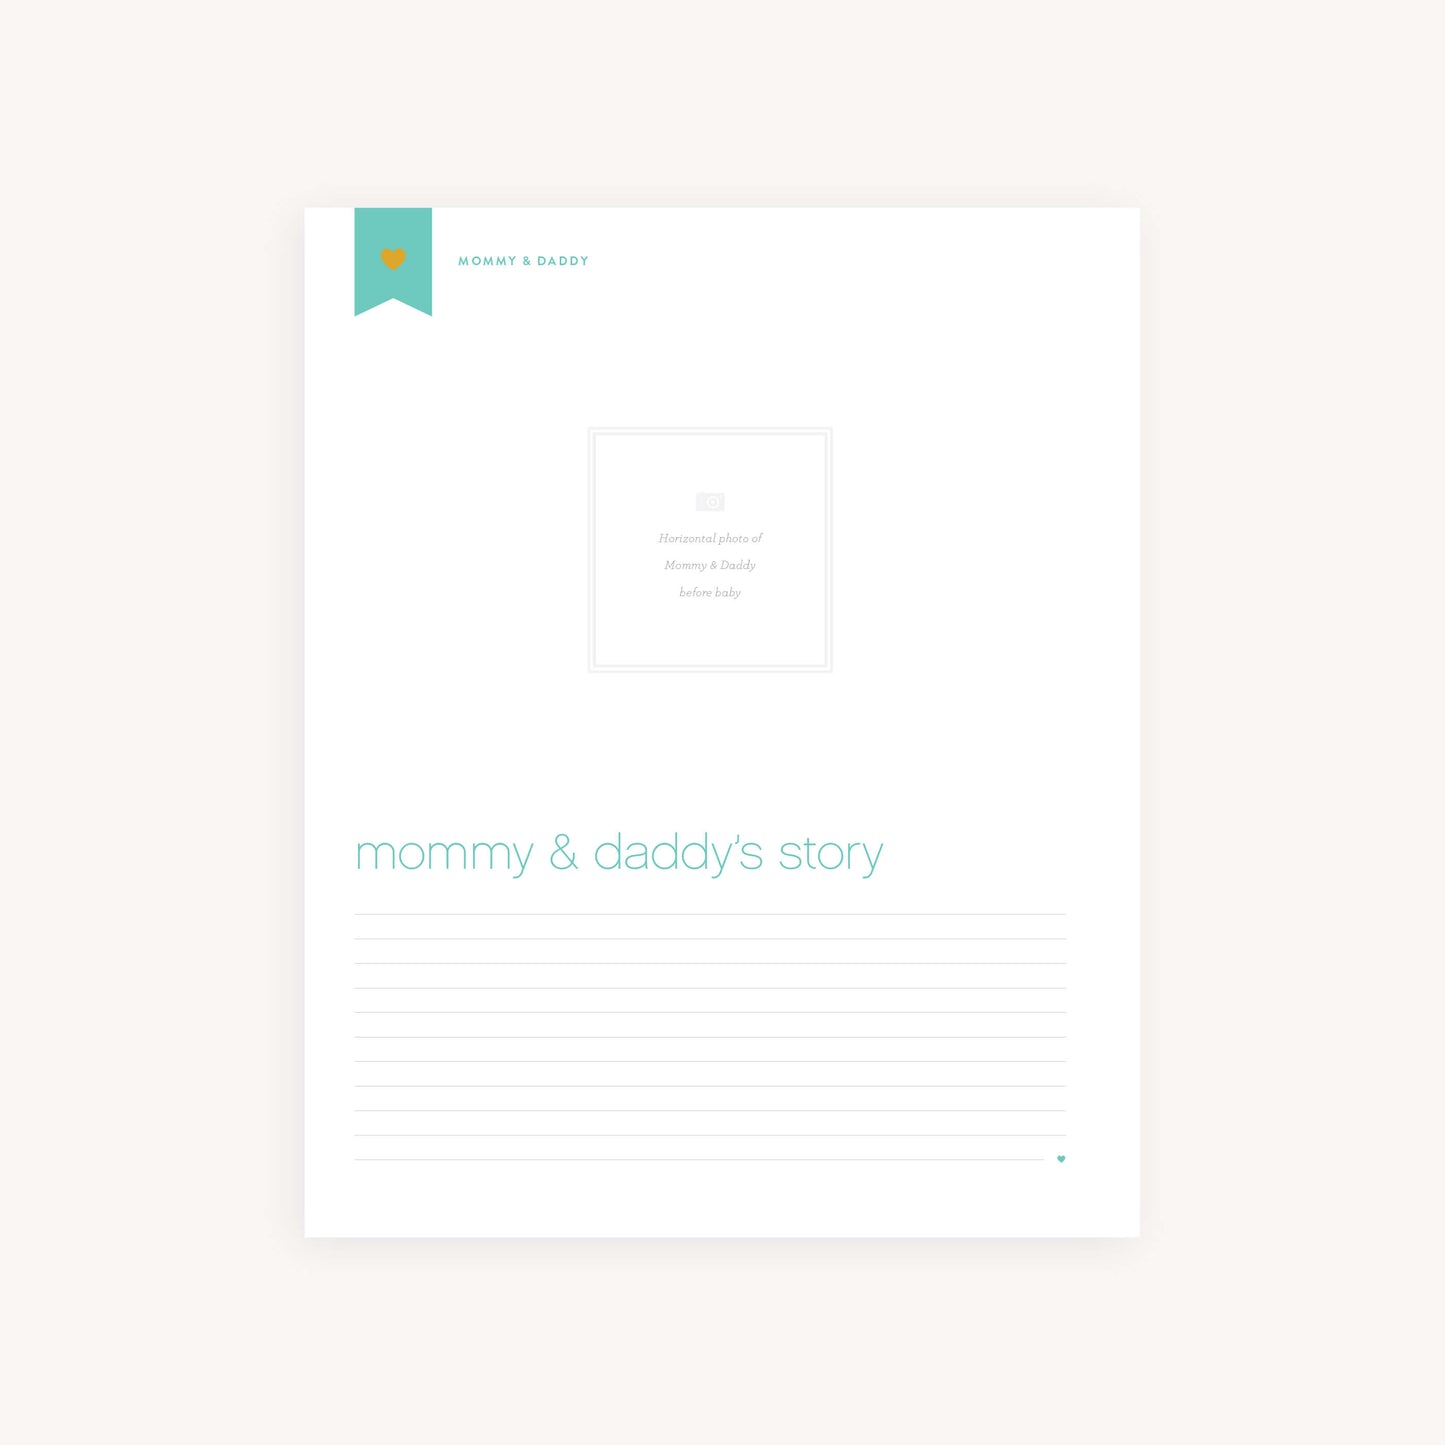 MOMMY & DADDY'S STORY